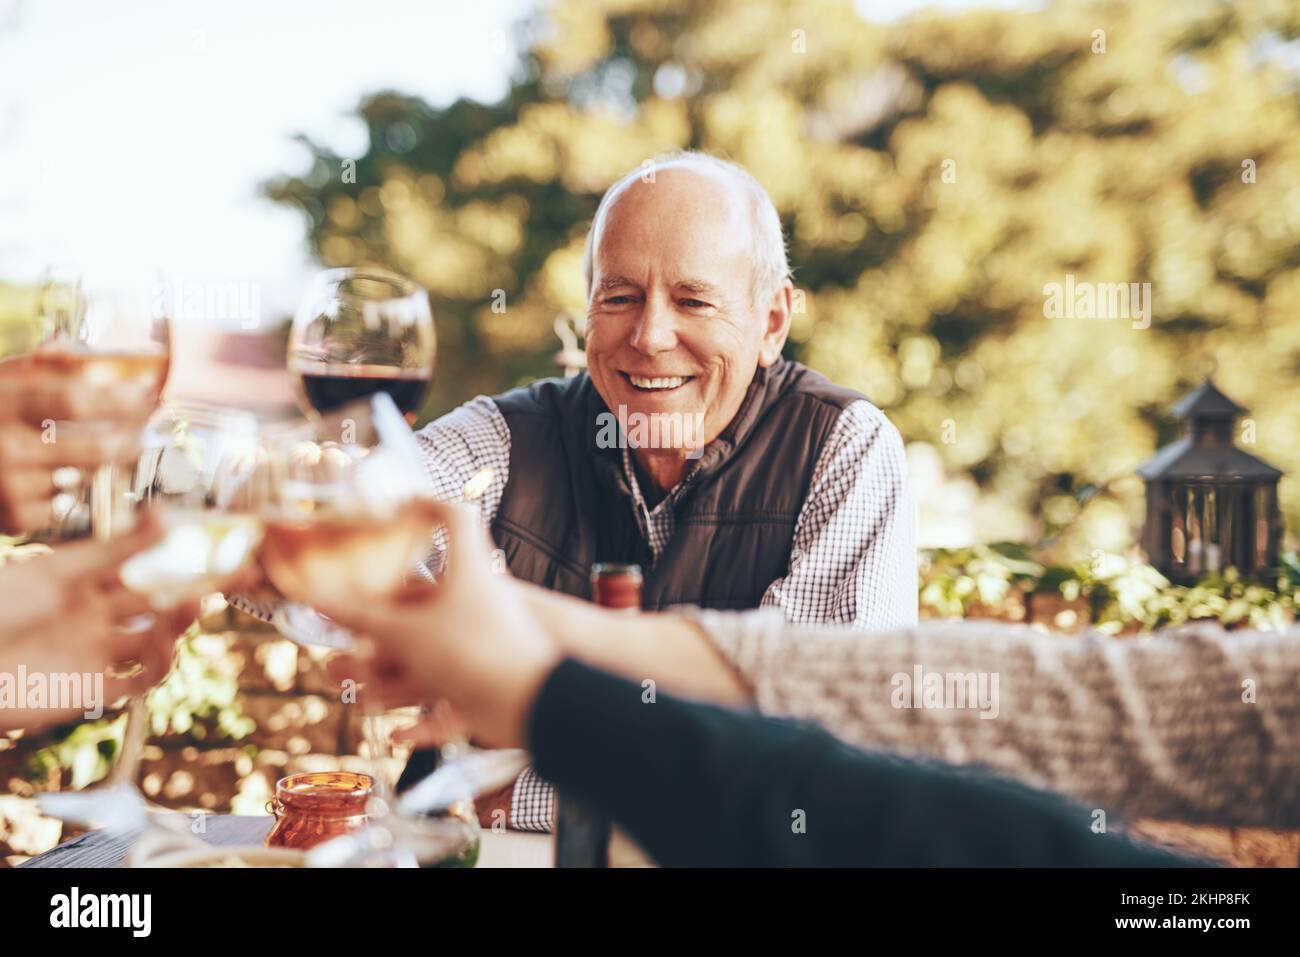 Wine, cheers and grandpa in christmas toast with family for holiday celebration together with food and friends in garden. Hands, wine glasses and Stock Photo